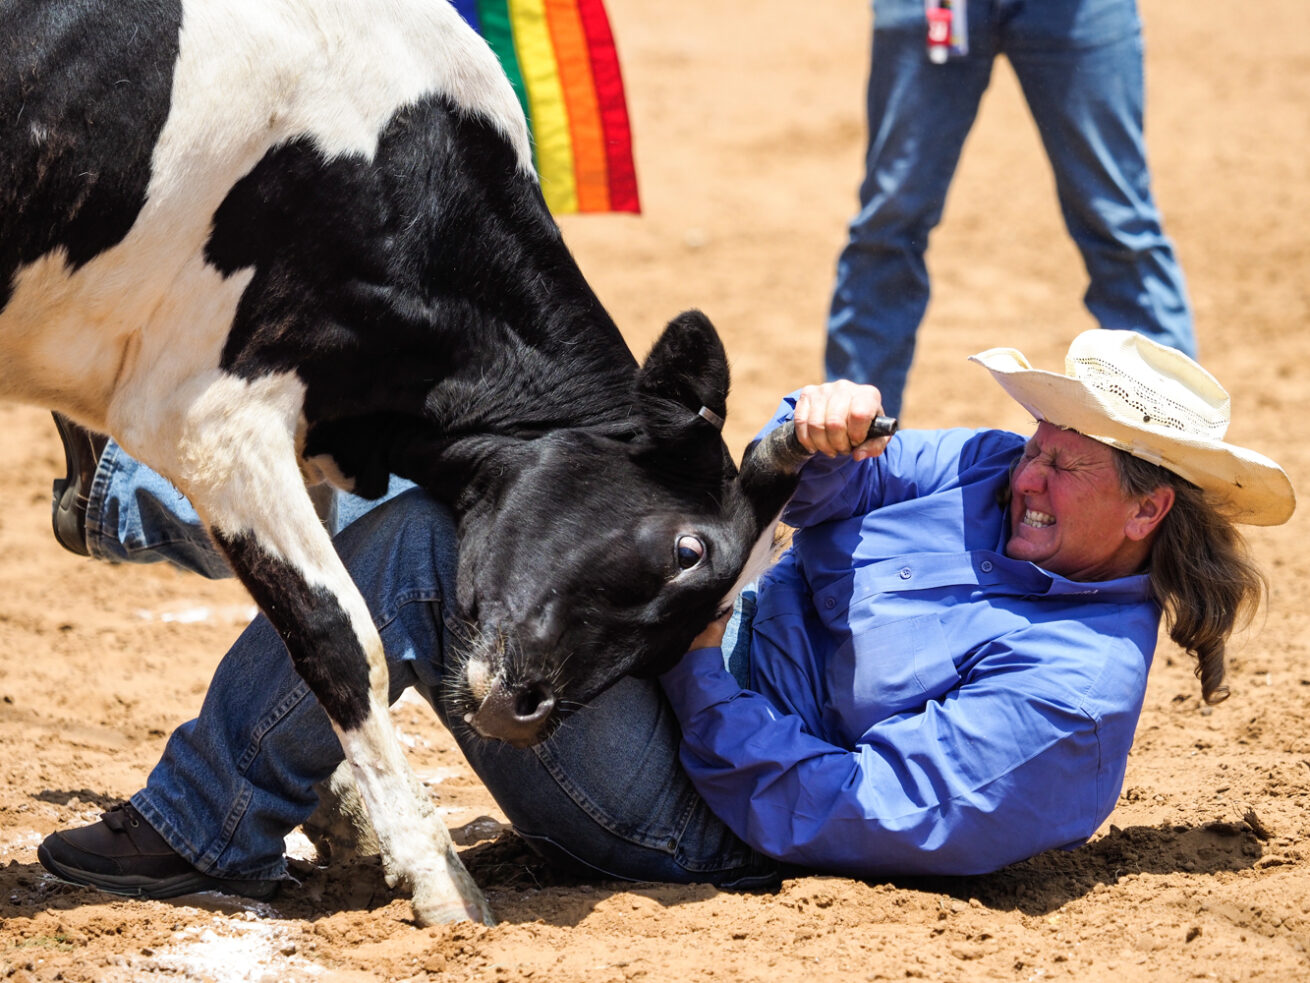 Contestants compete in chute dogging during The Texas Tradition Rodeo & Country Fair at The North Texas Fairgrounds, Saturday, May 25, 2019, in Denton, Texas.  The rodeo and country fair offers all the high points of the professional rodeo circuit — bull riding, barrel racing and calf roping.